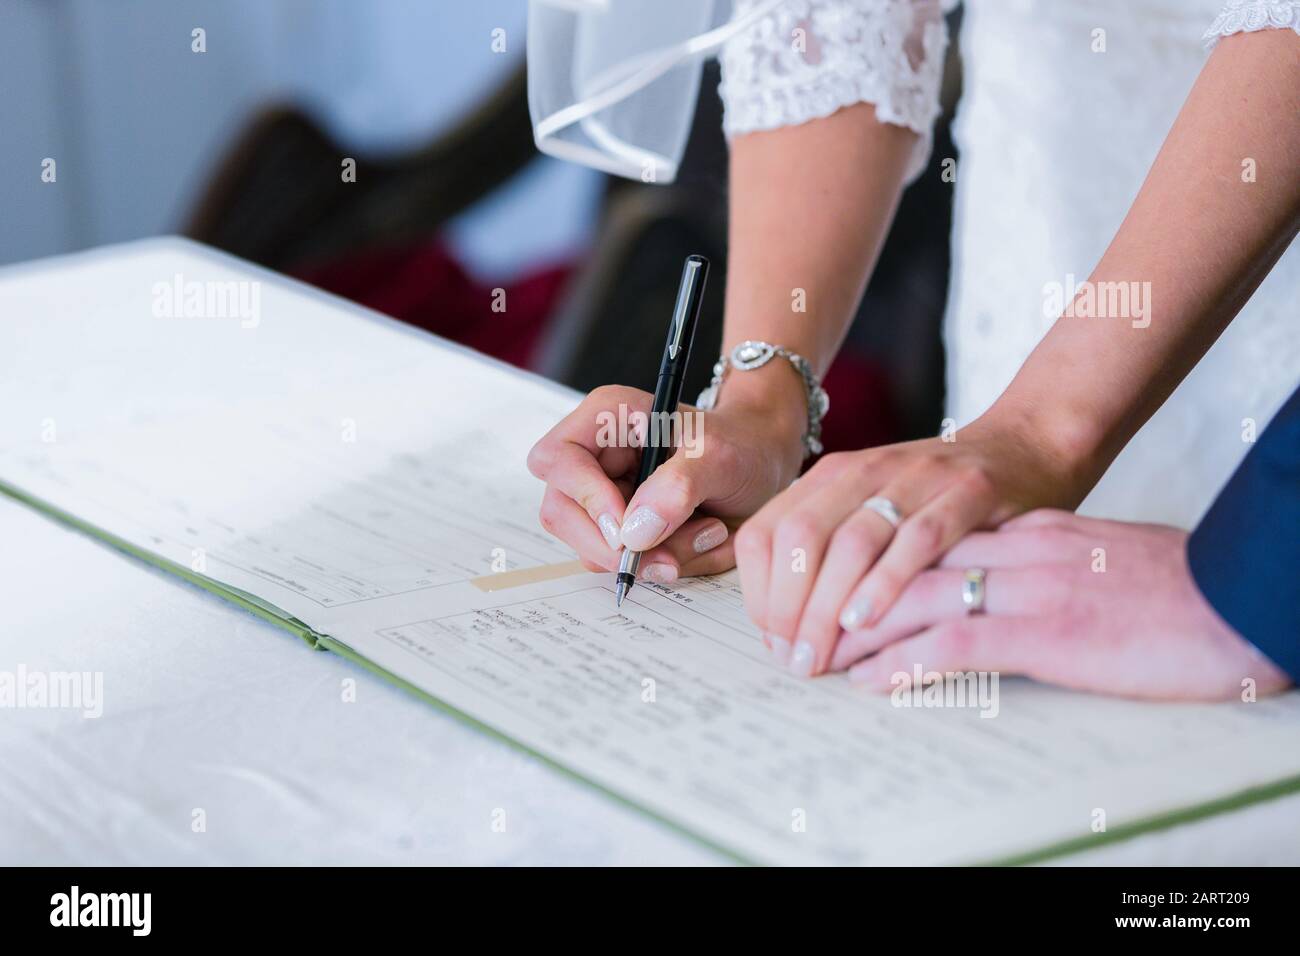 A bride and groom sign a church marriage registration book following their church wedding. Both wedding rings are clearly visible Stock Photo